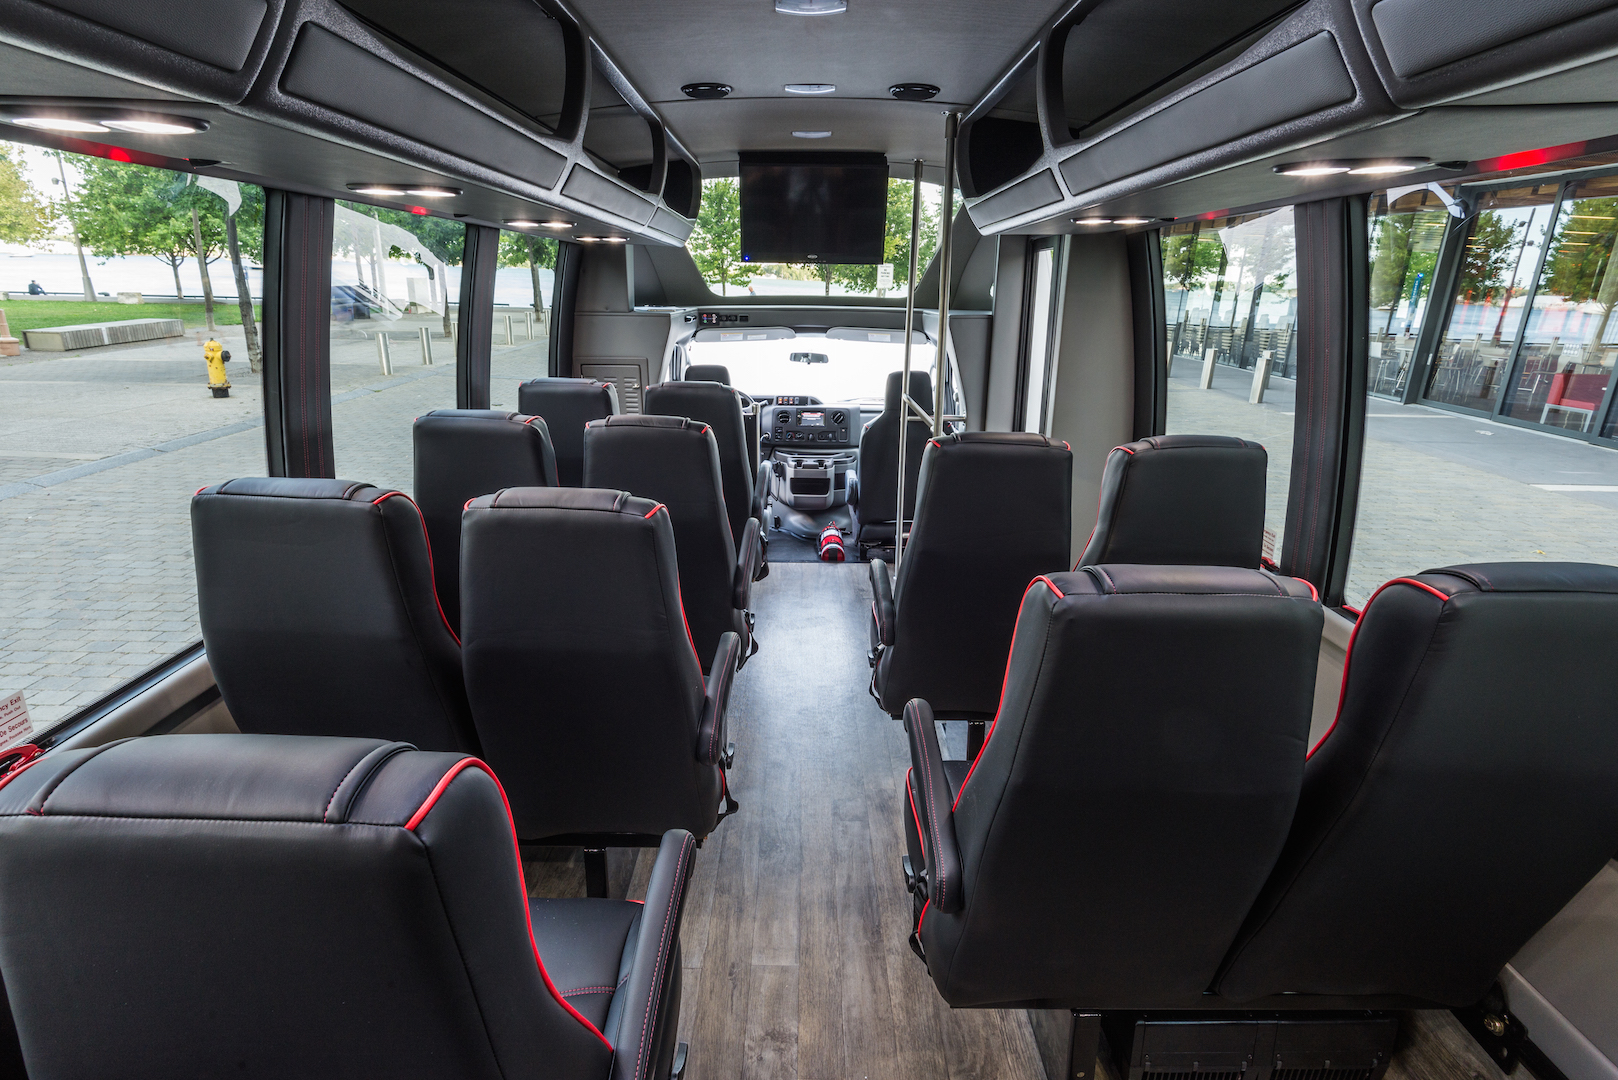 Excel Limousine Minibus Interior Black Leather picture from the back